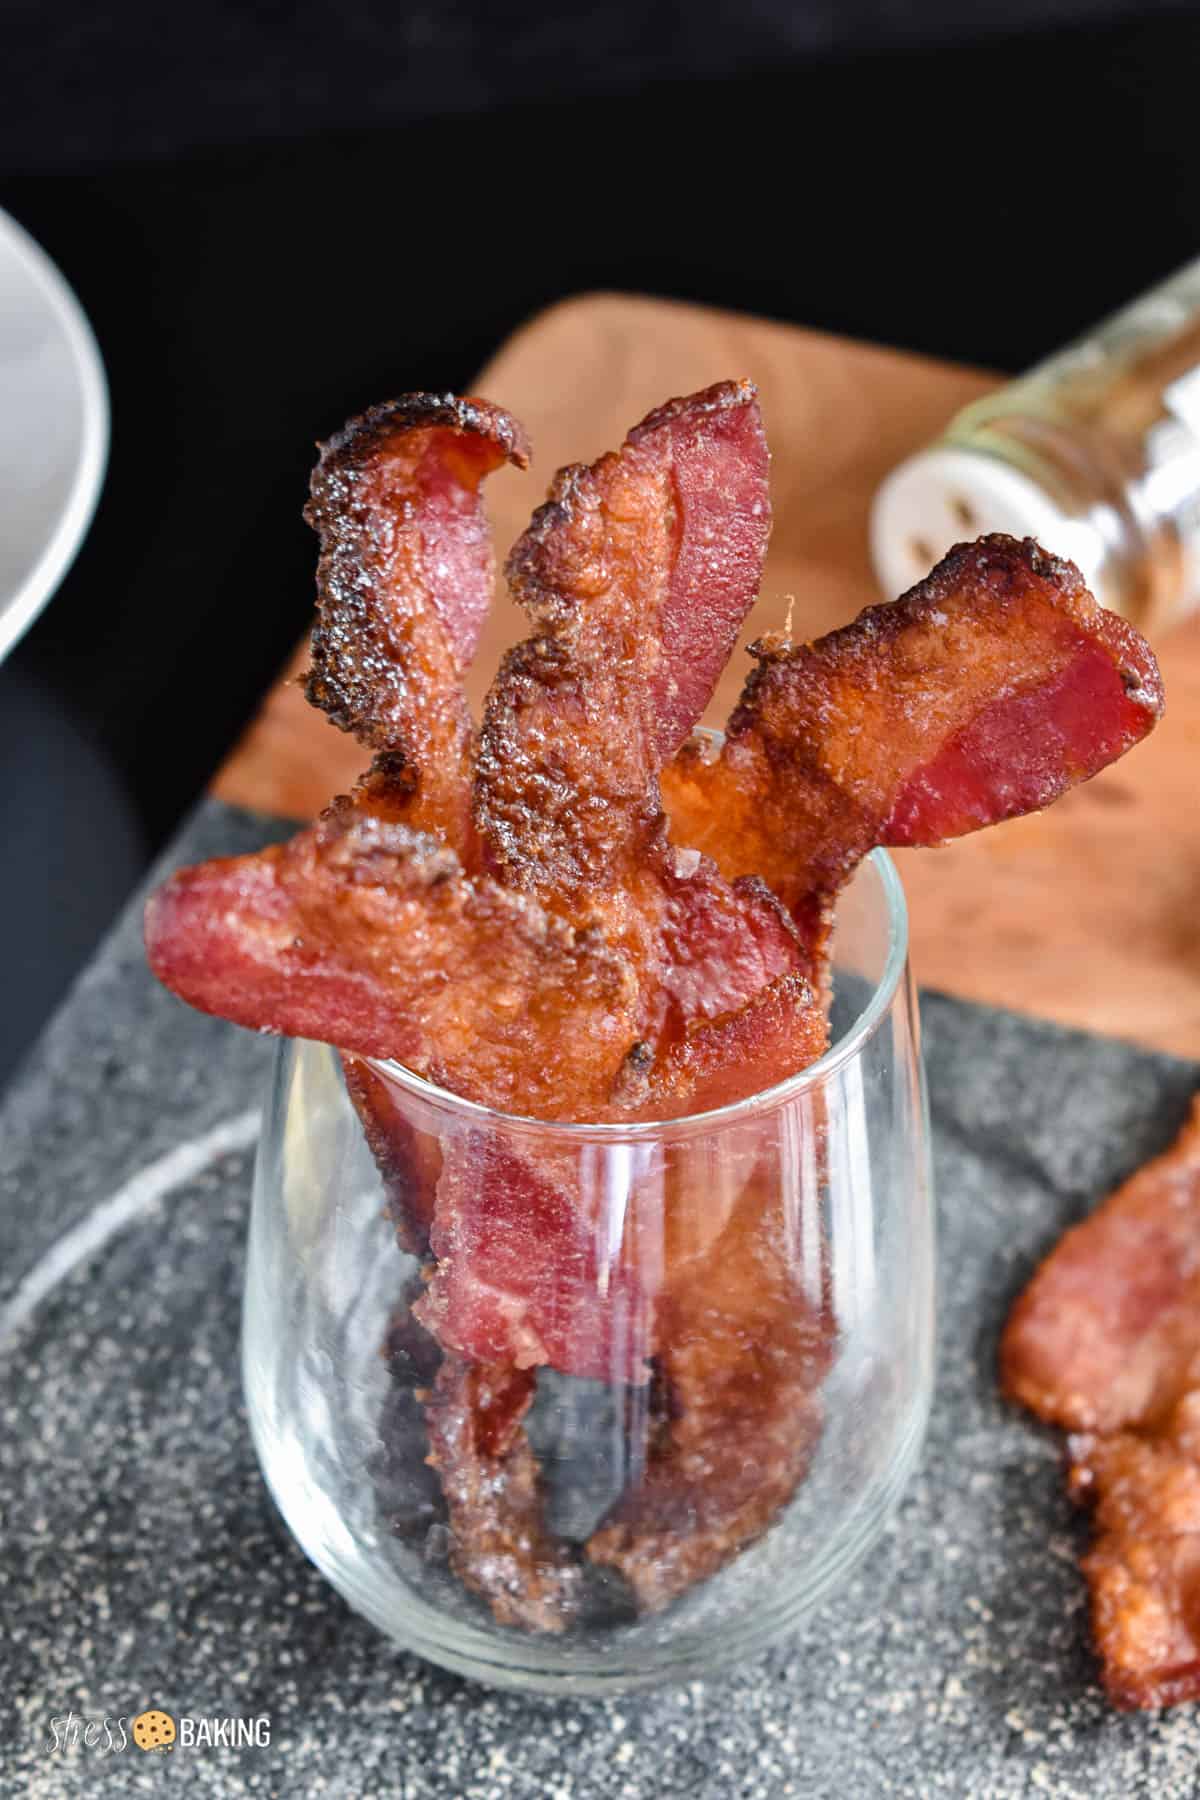 Candied bacon strips in a clear glass on a charcoal and wood surface